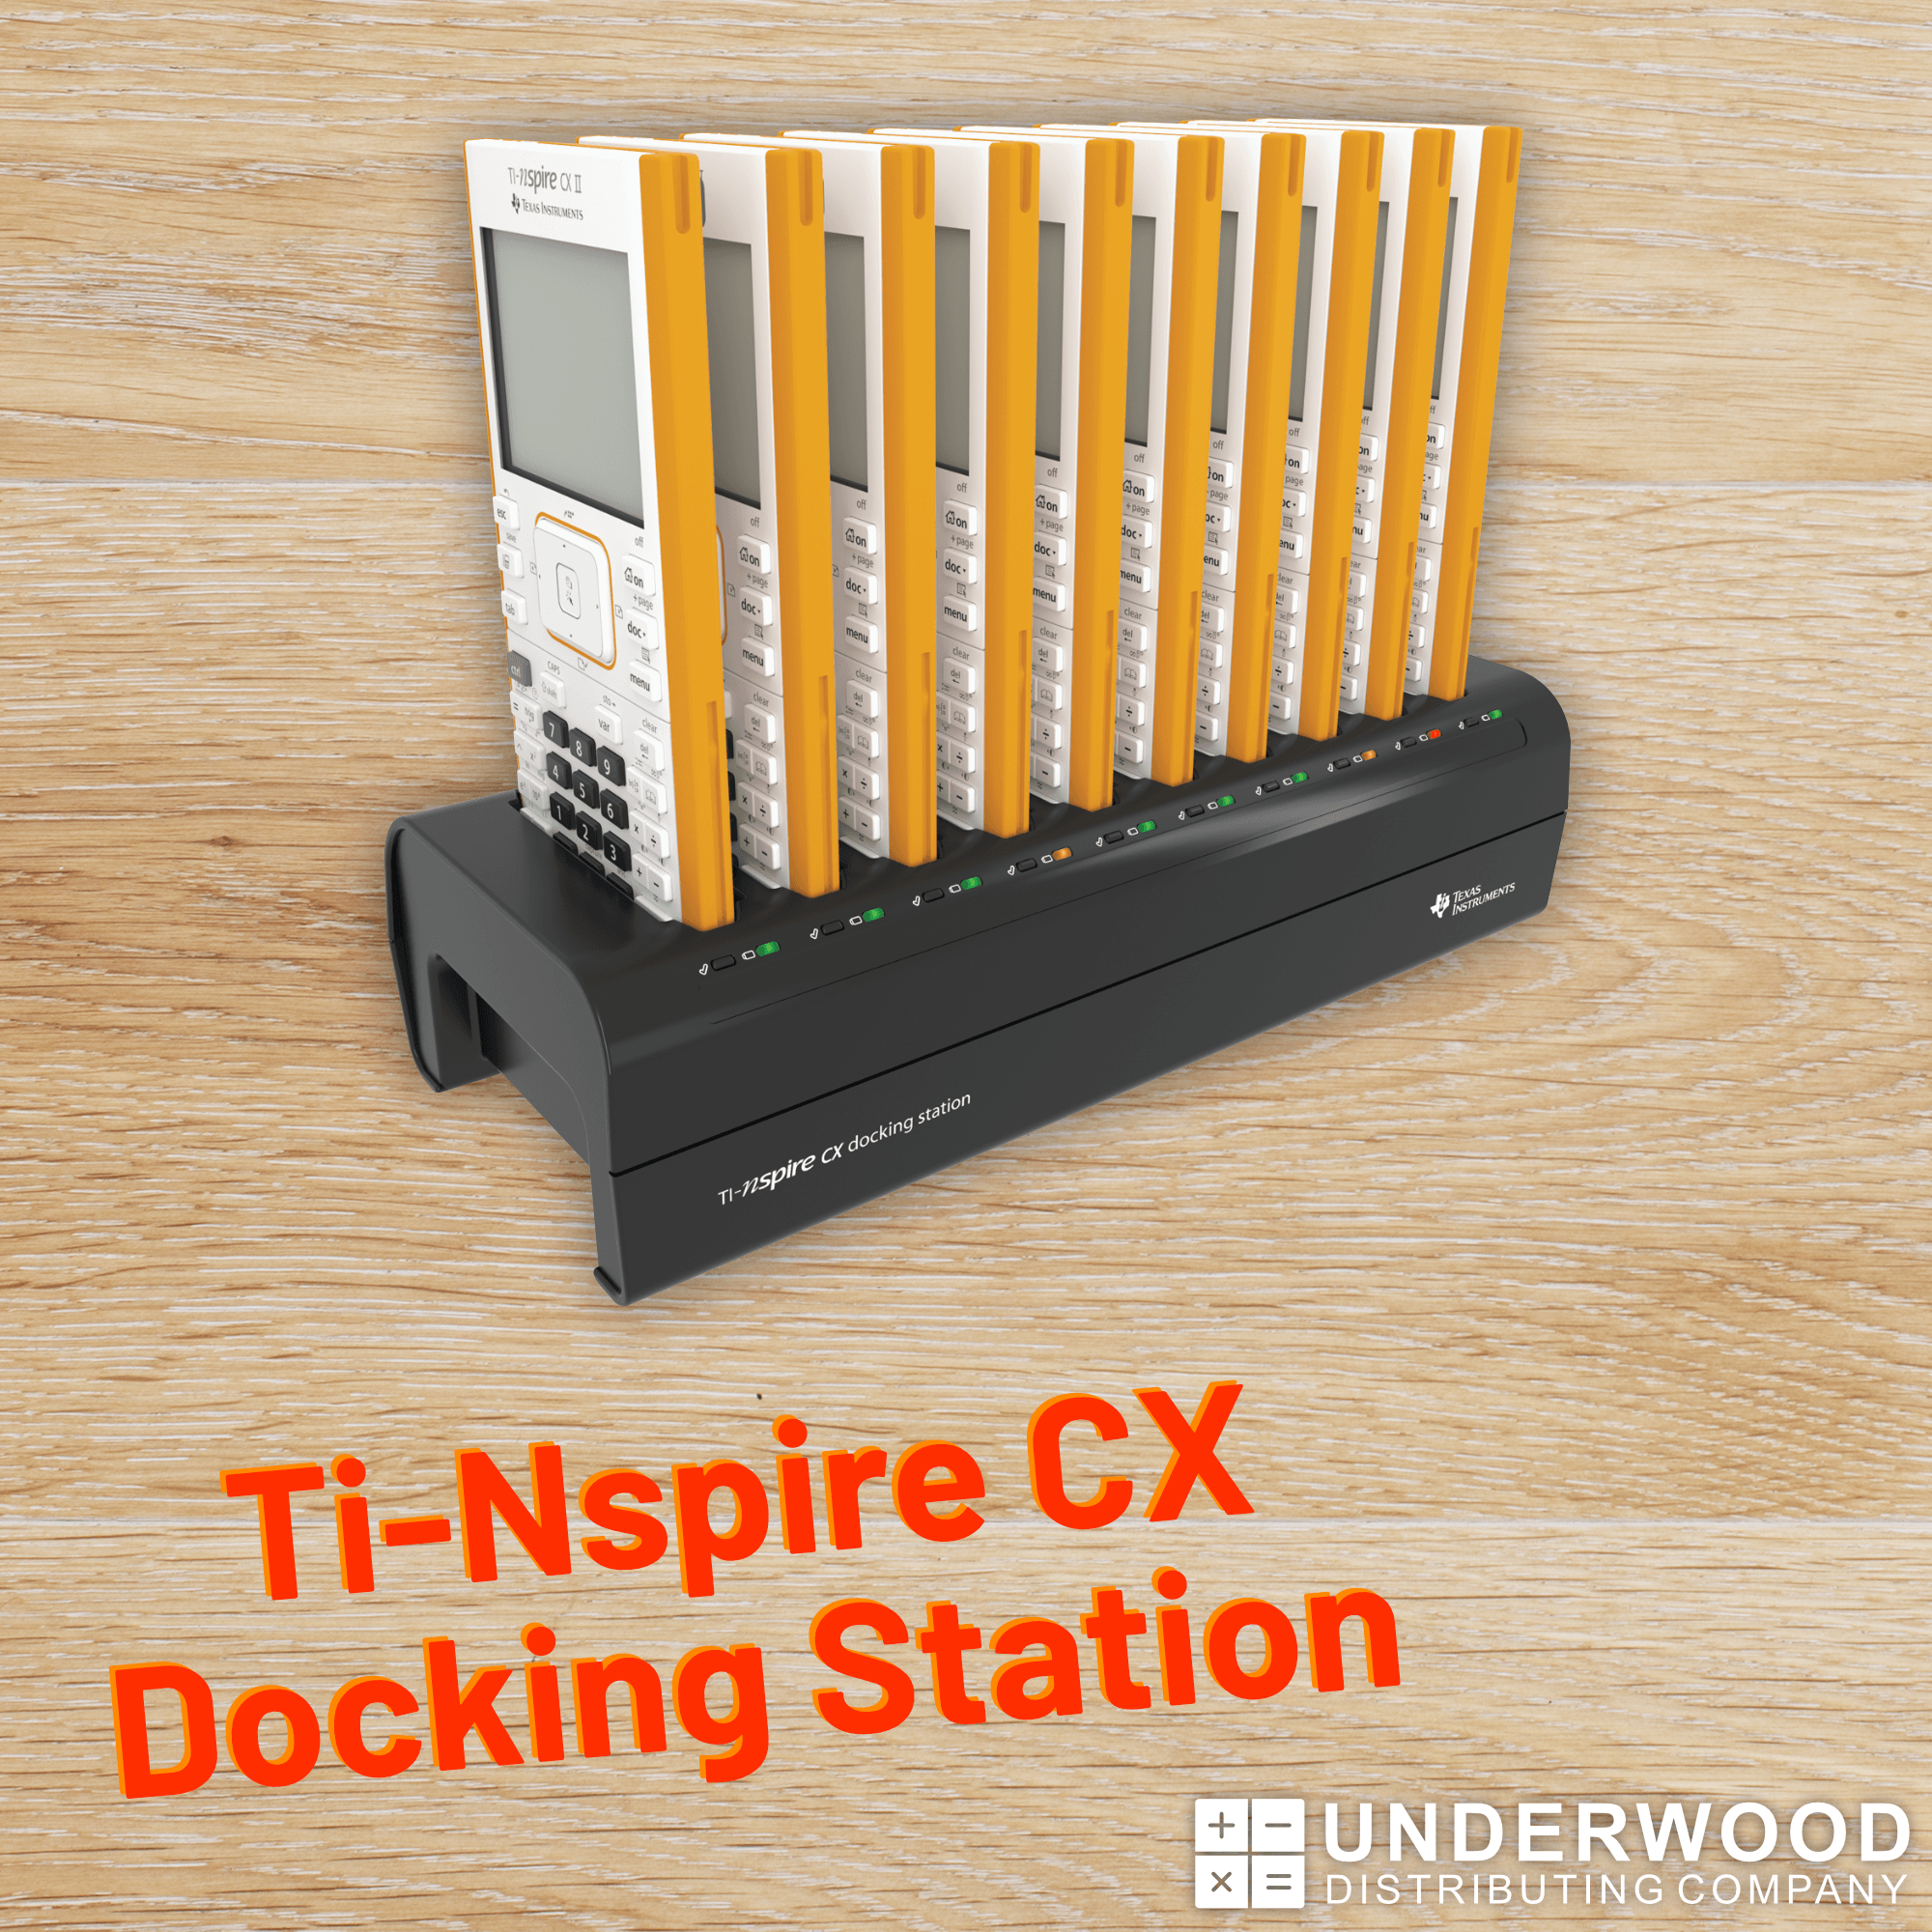 Can the Ti-Nspire CX Docking Station transfer data to the calculators? - Underwood Distributing Co.